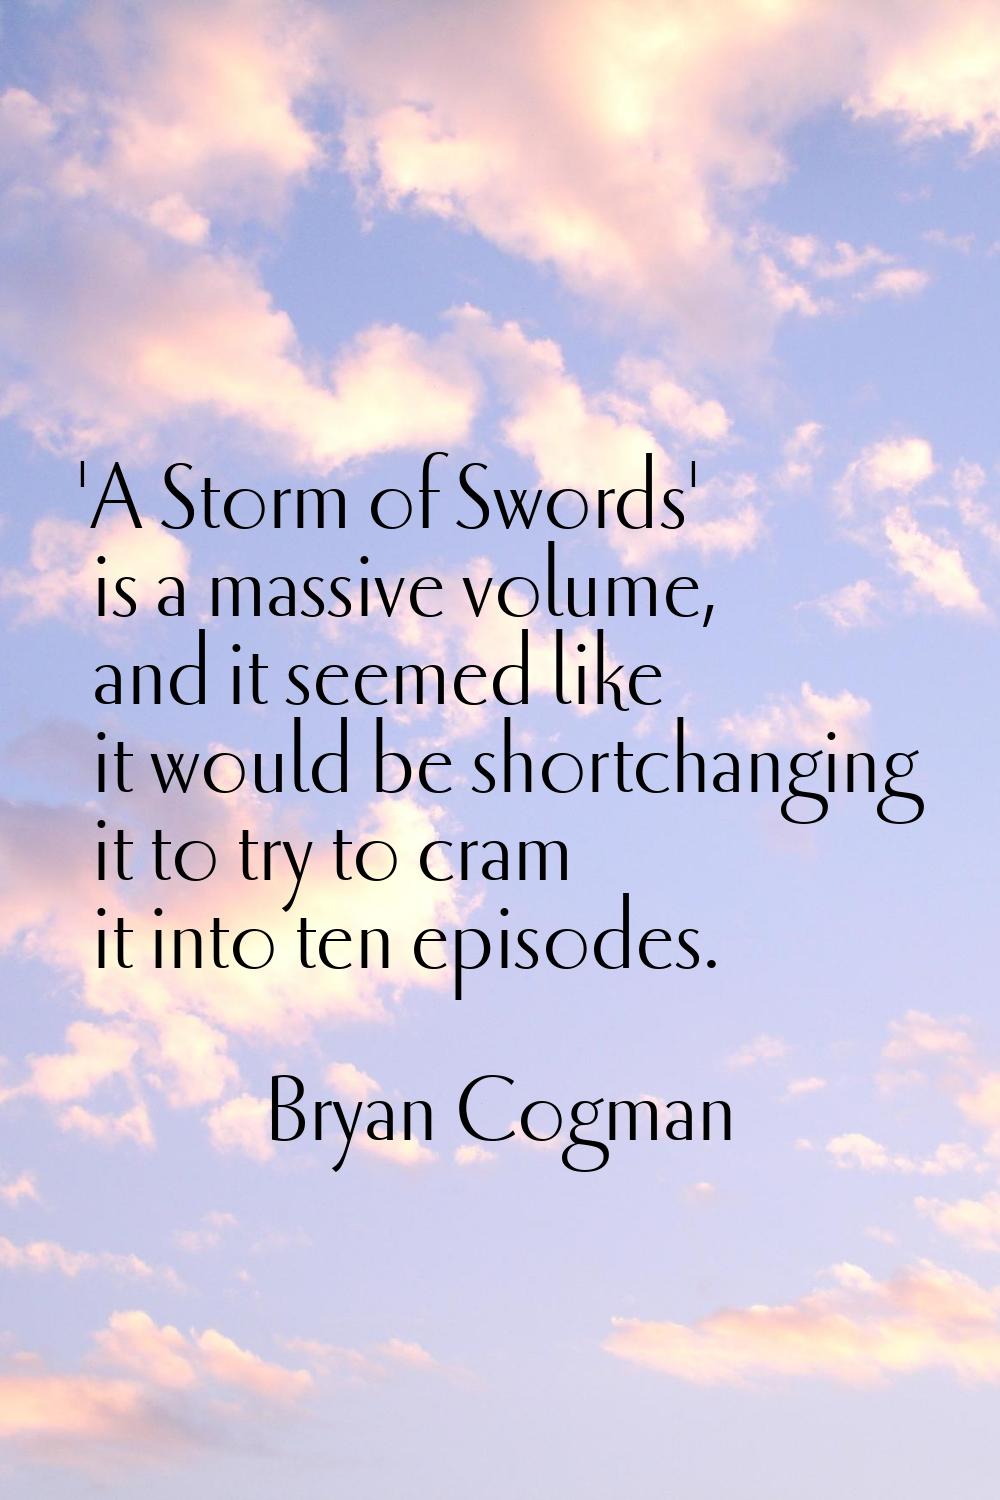 'A Storm of Swords' is a massive volume, and it seemed like it would be shortchanging it to try to 